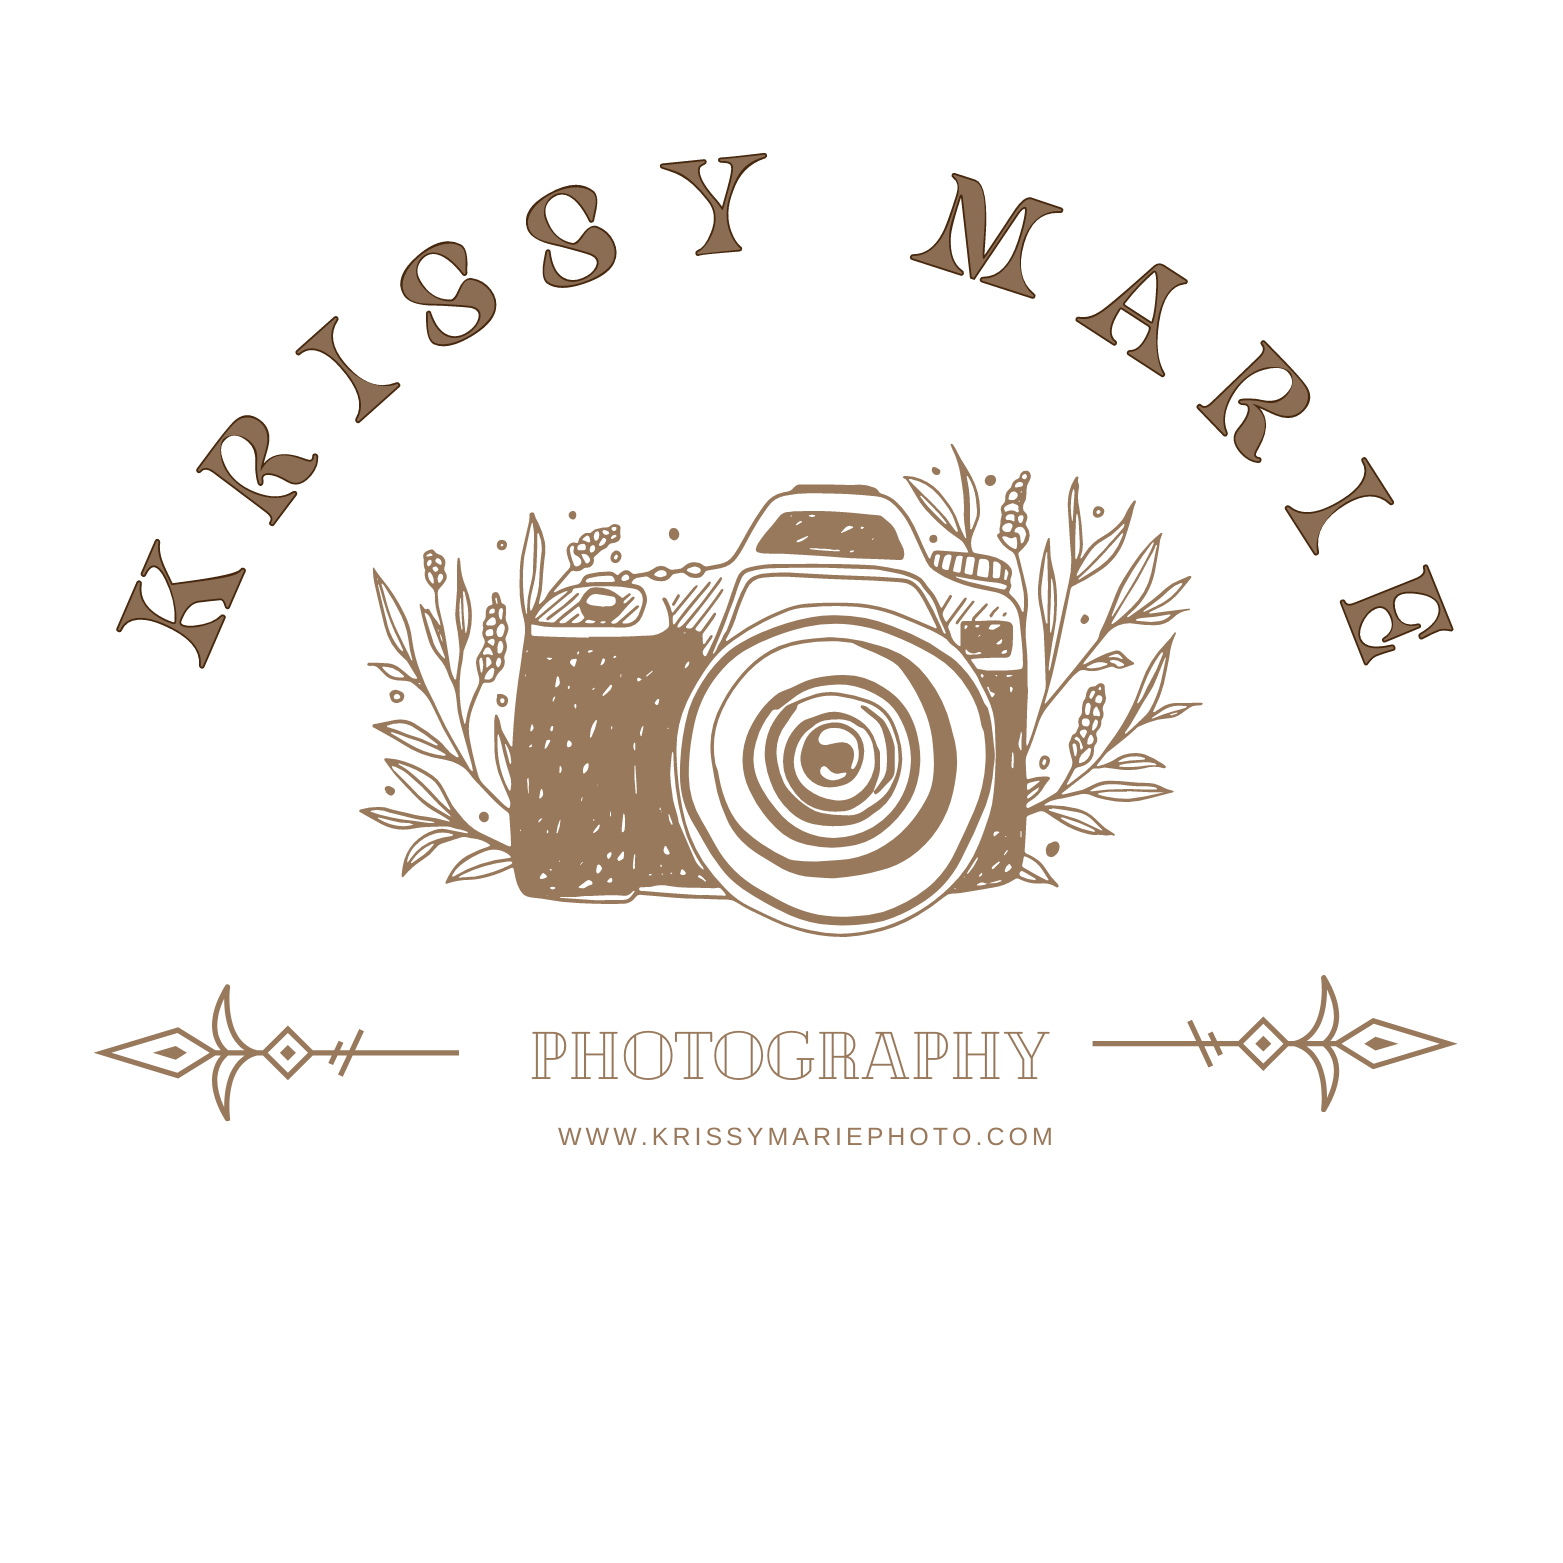 Krissy Marie Photography